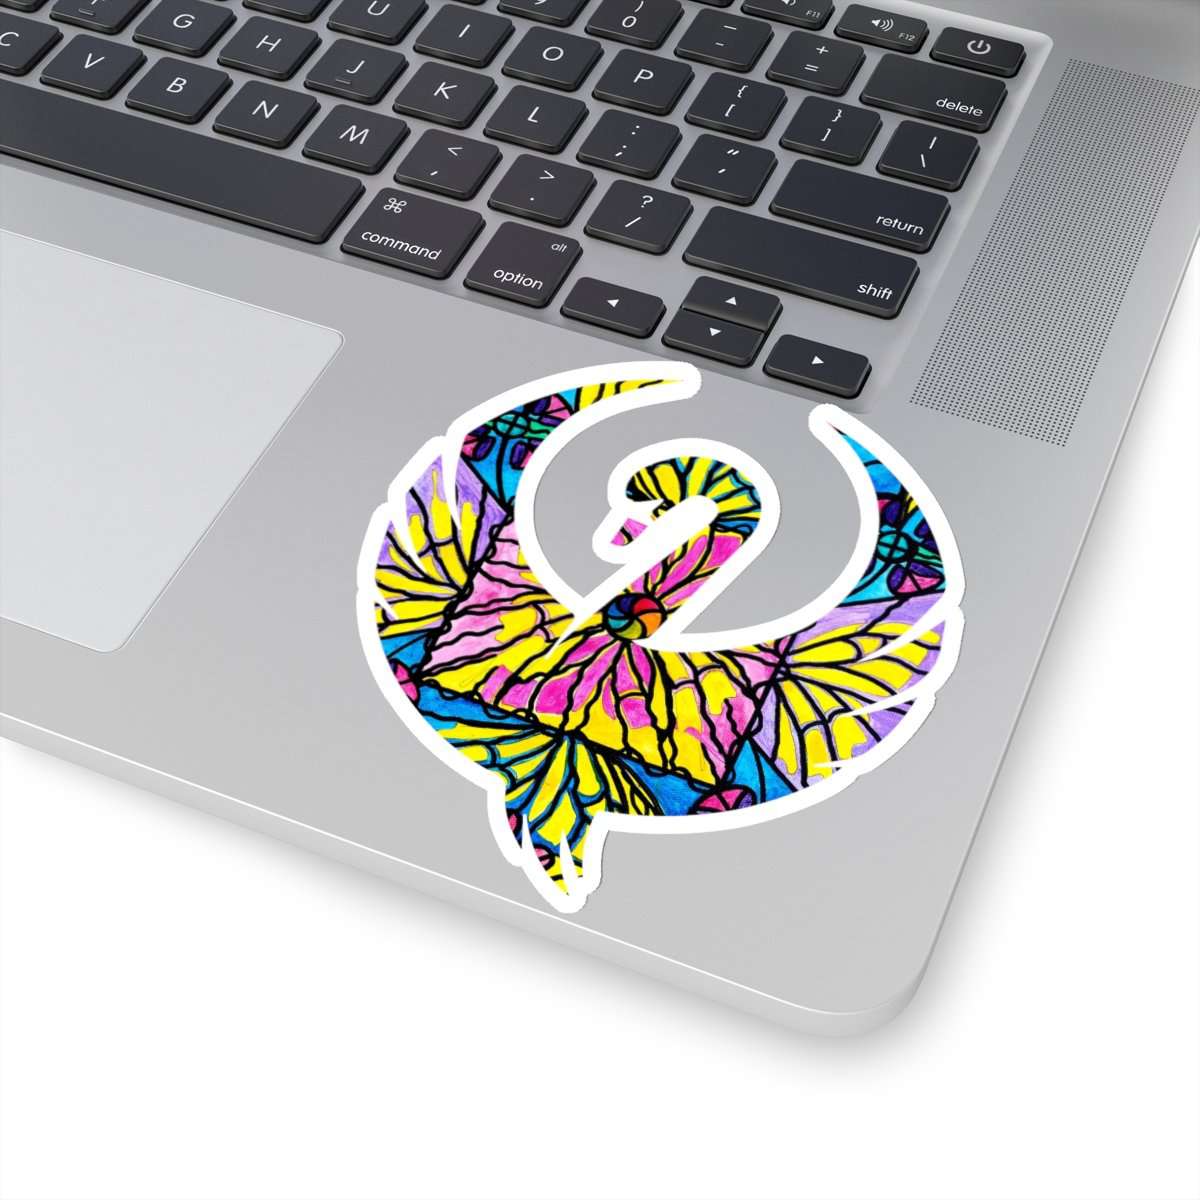 be-the-first-to-own-the-newest-beltane-swan-stickers-hot-on-sale_11.jpg